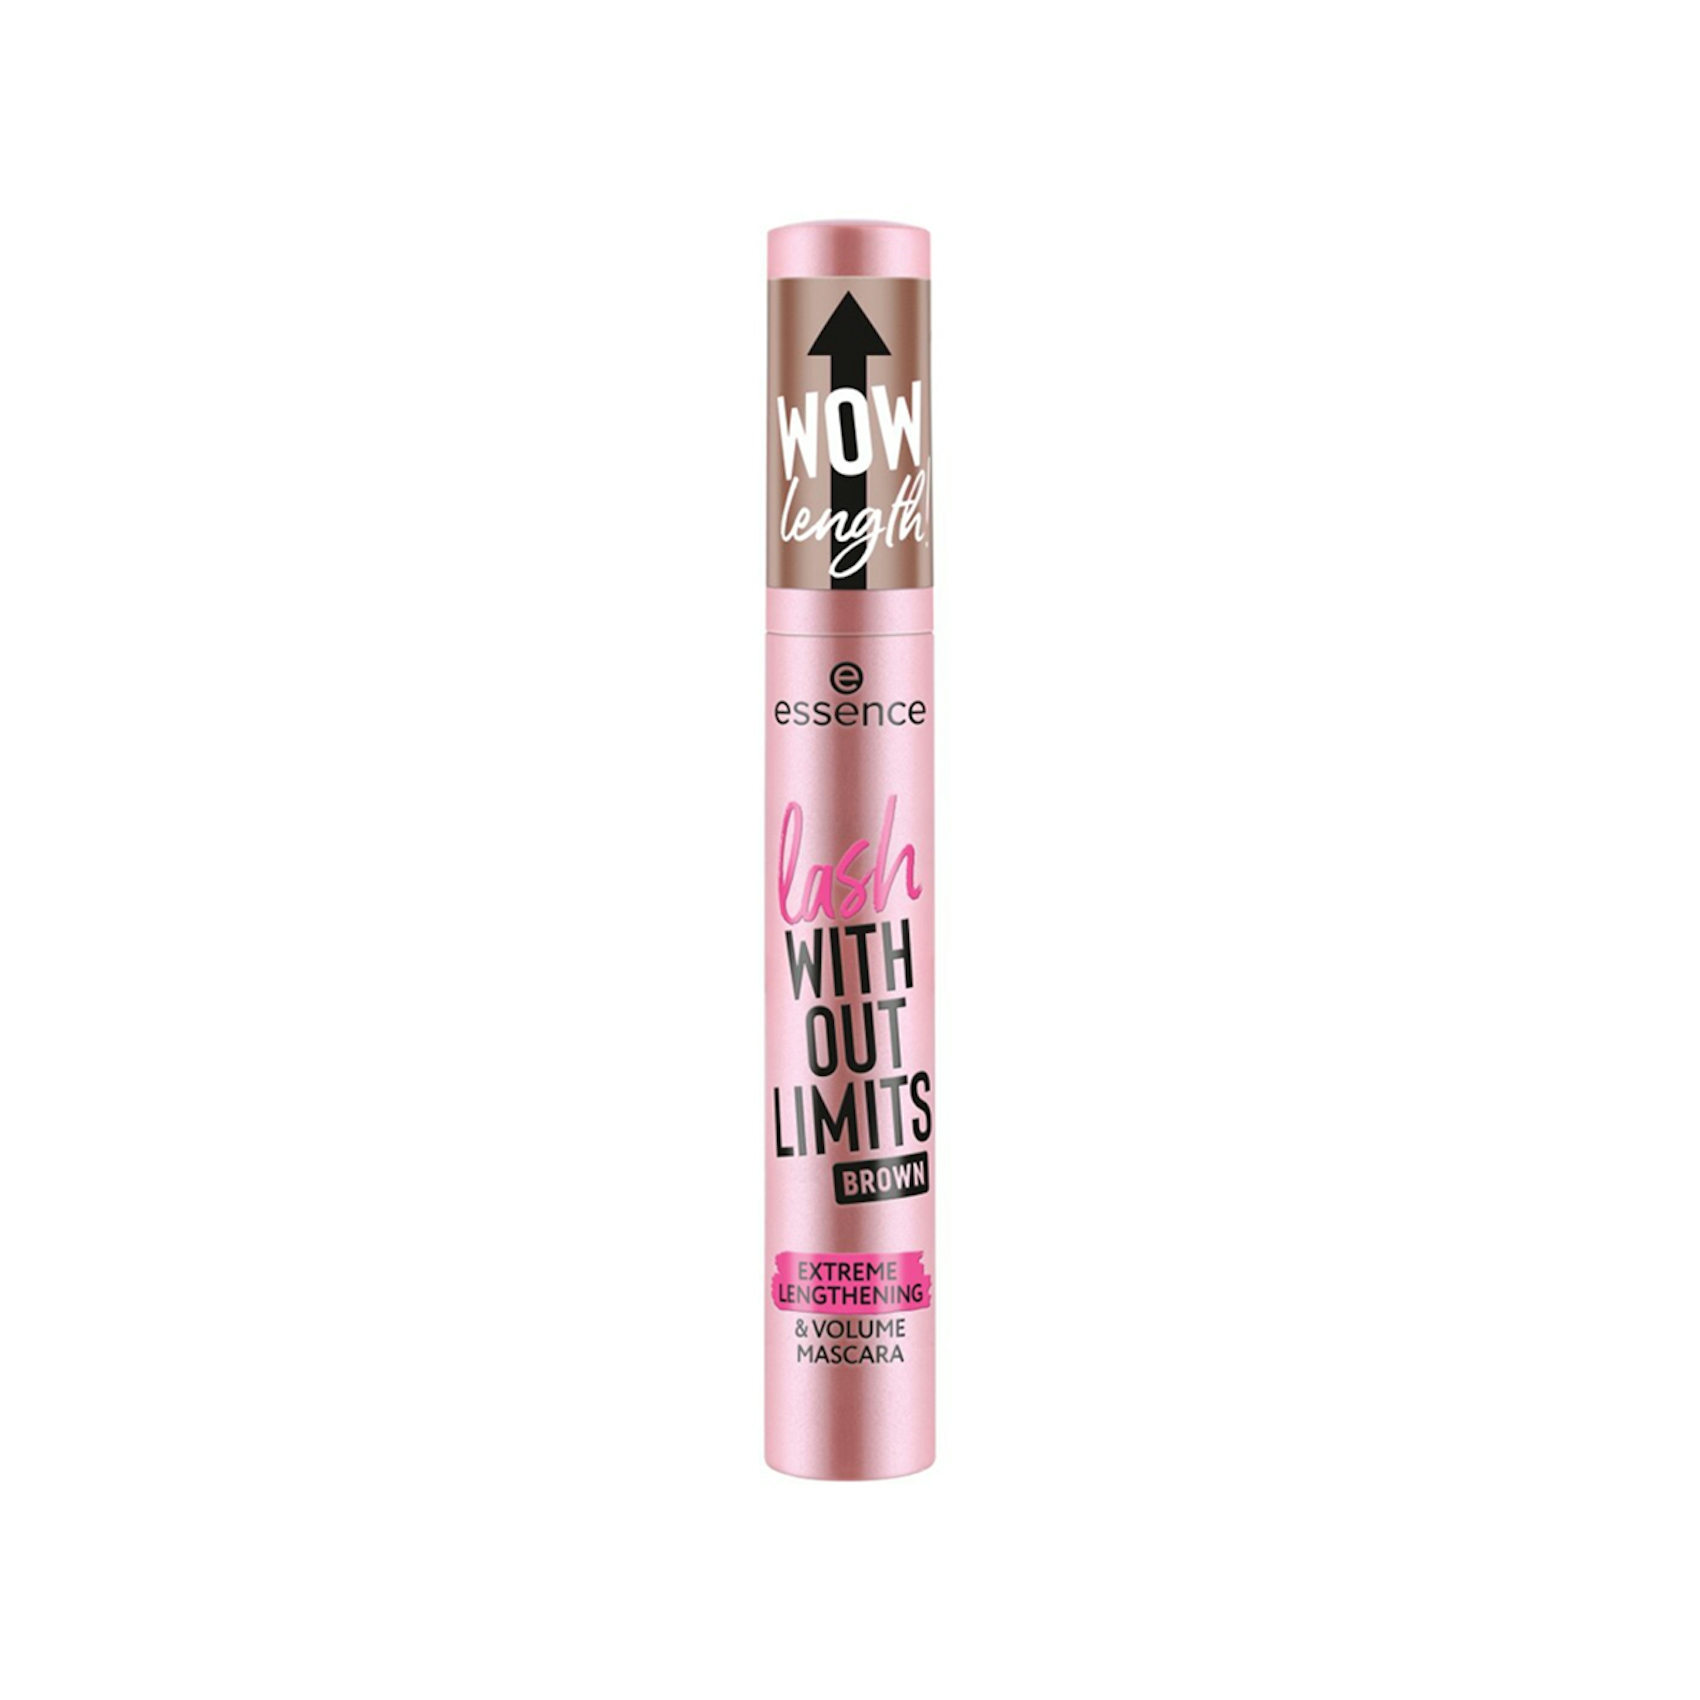 Essence Máscara Without Limits Brown Extreme Lengthening & Volume 02